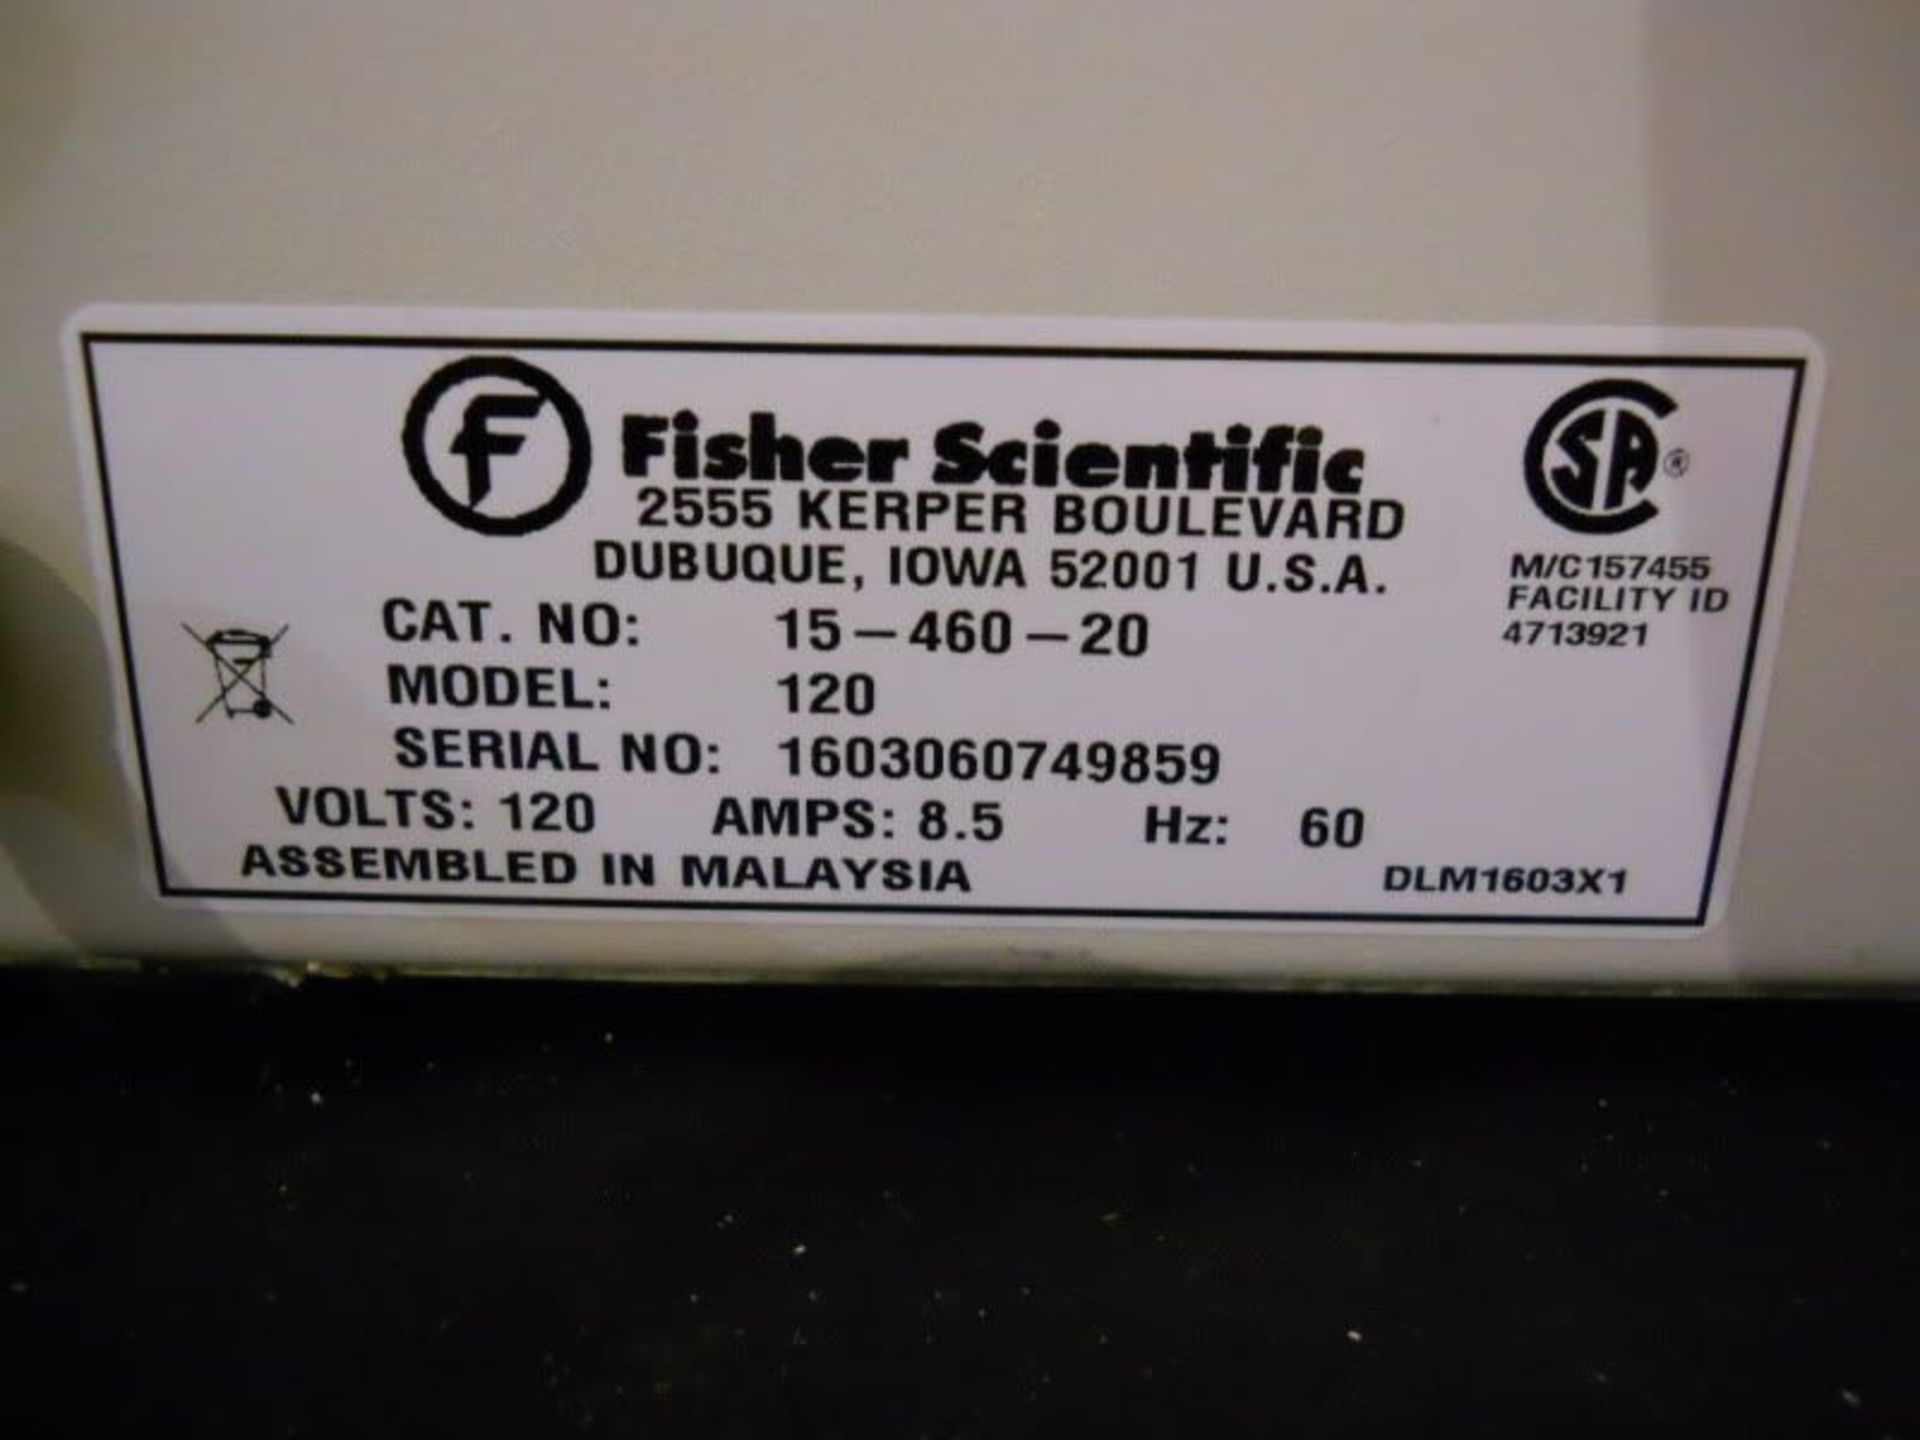 Fisher Scientific Isotemp 120 Water Bath Cat No 15-460-20 (1546020), Qty 1, 321058350159 - Image 5 of 7